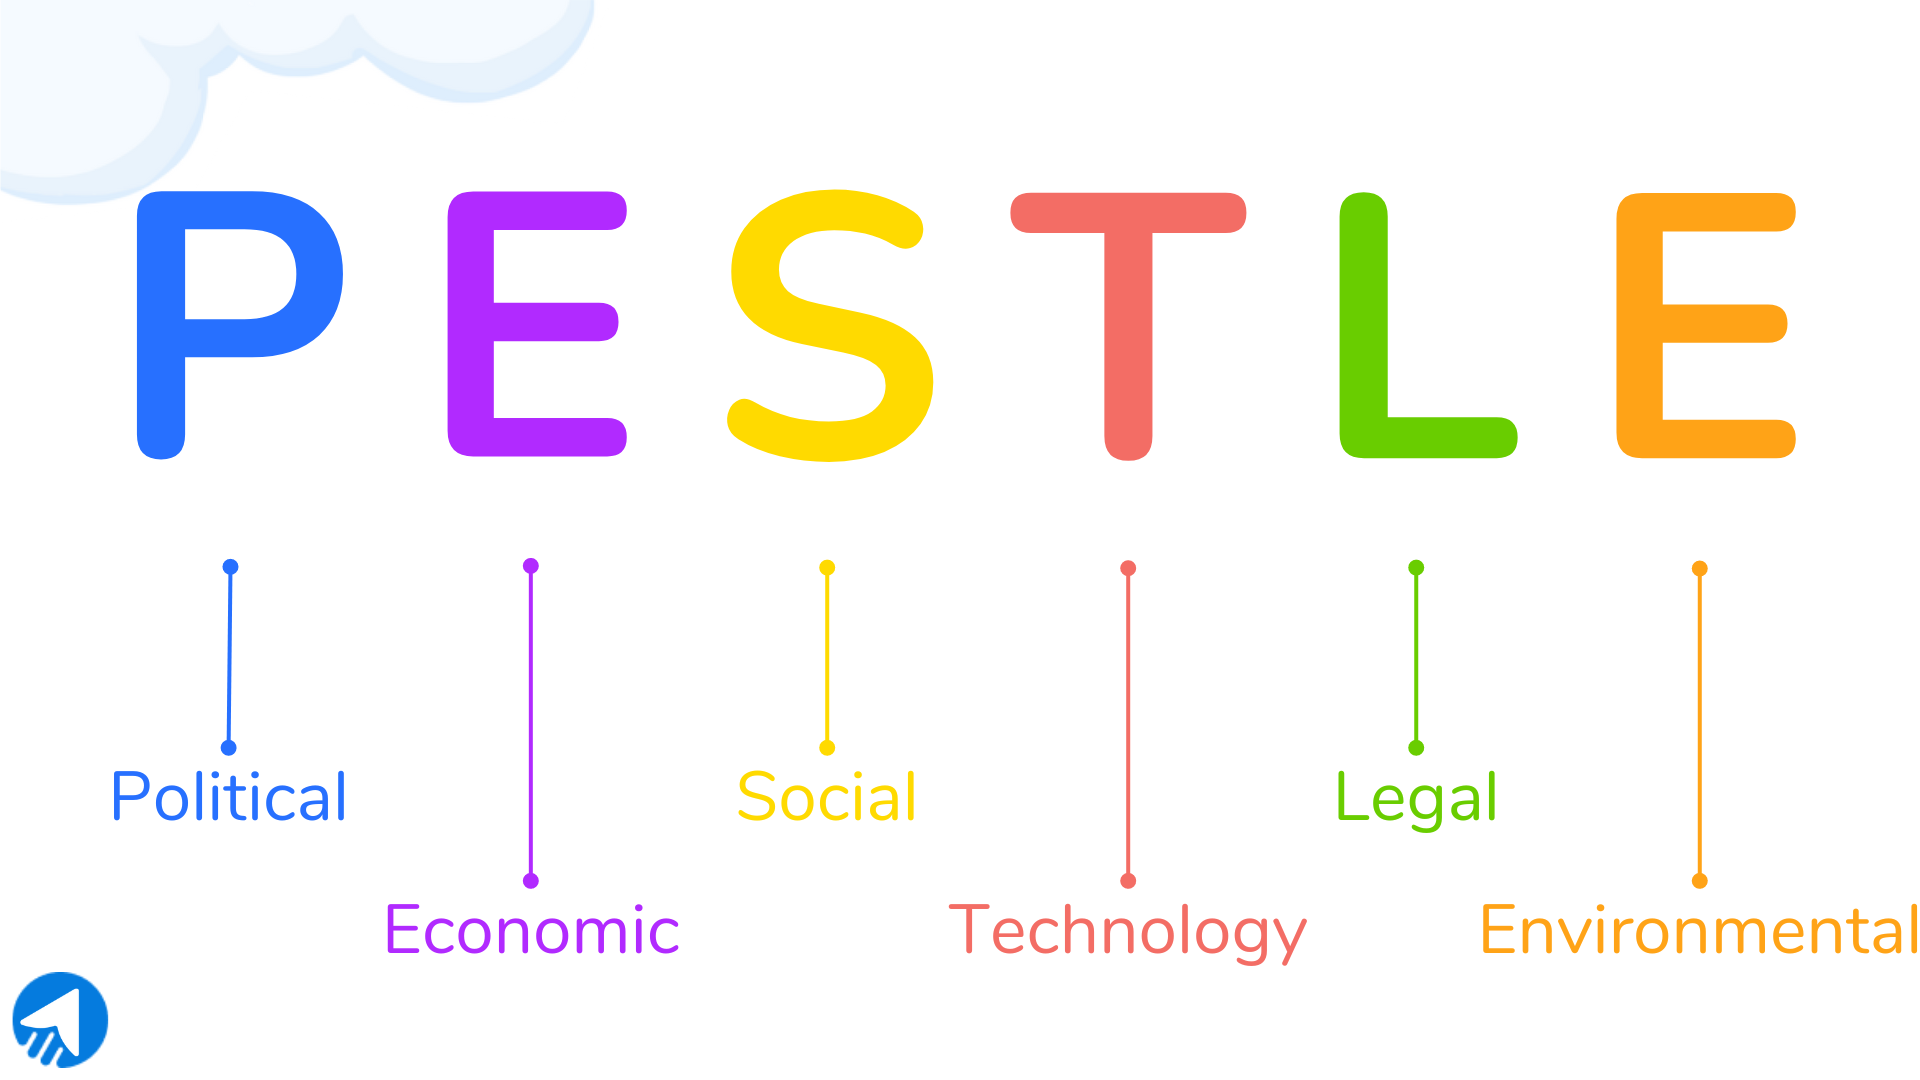 PESTLE Analysis, or the external factors analysis that impact the business